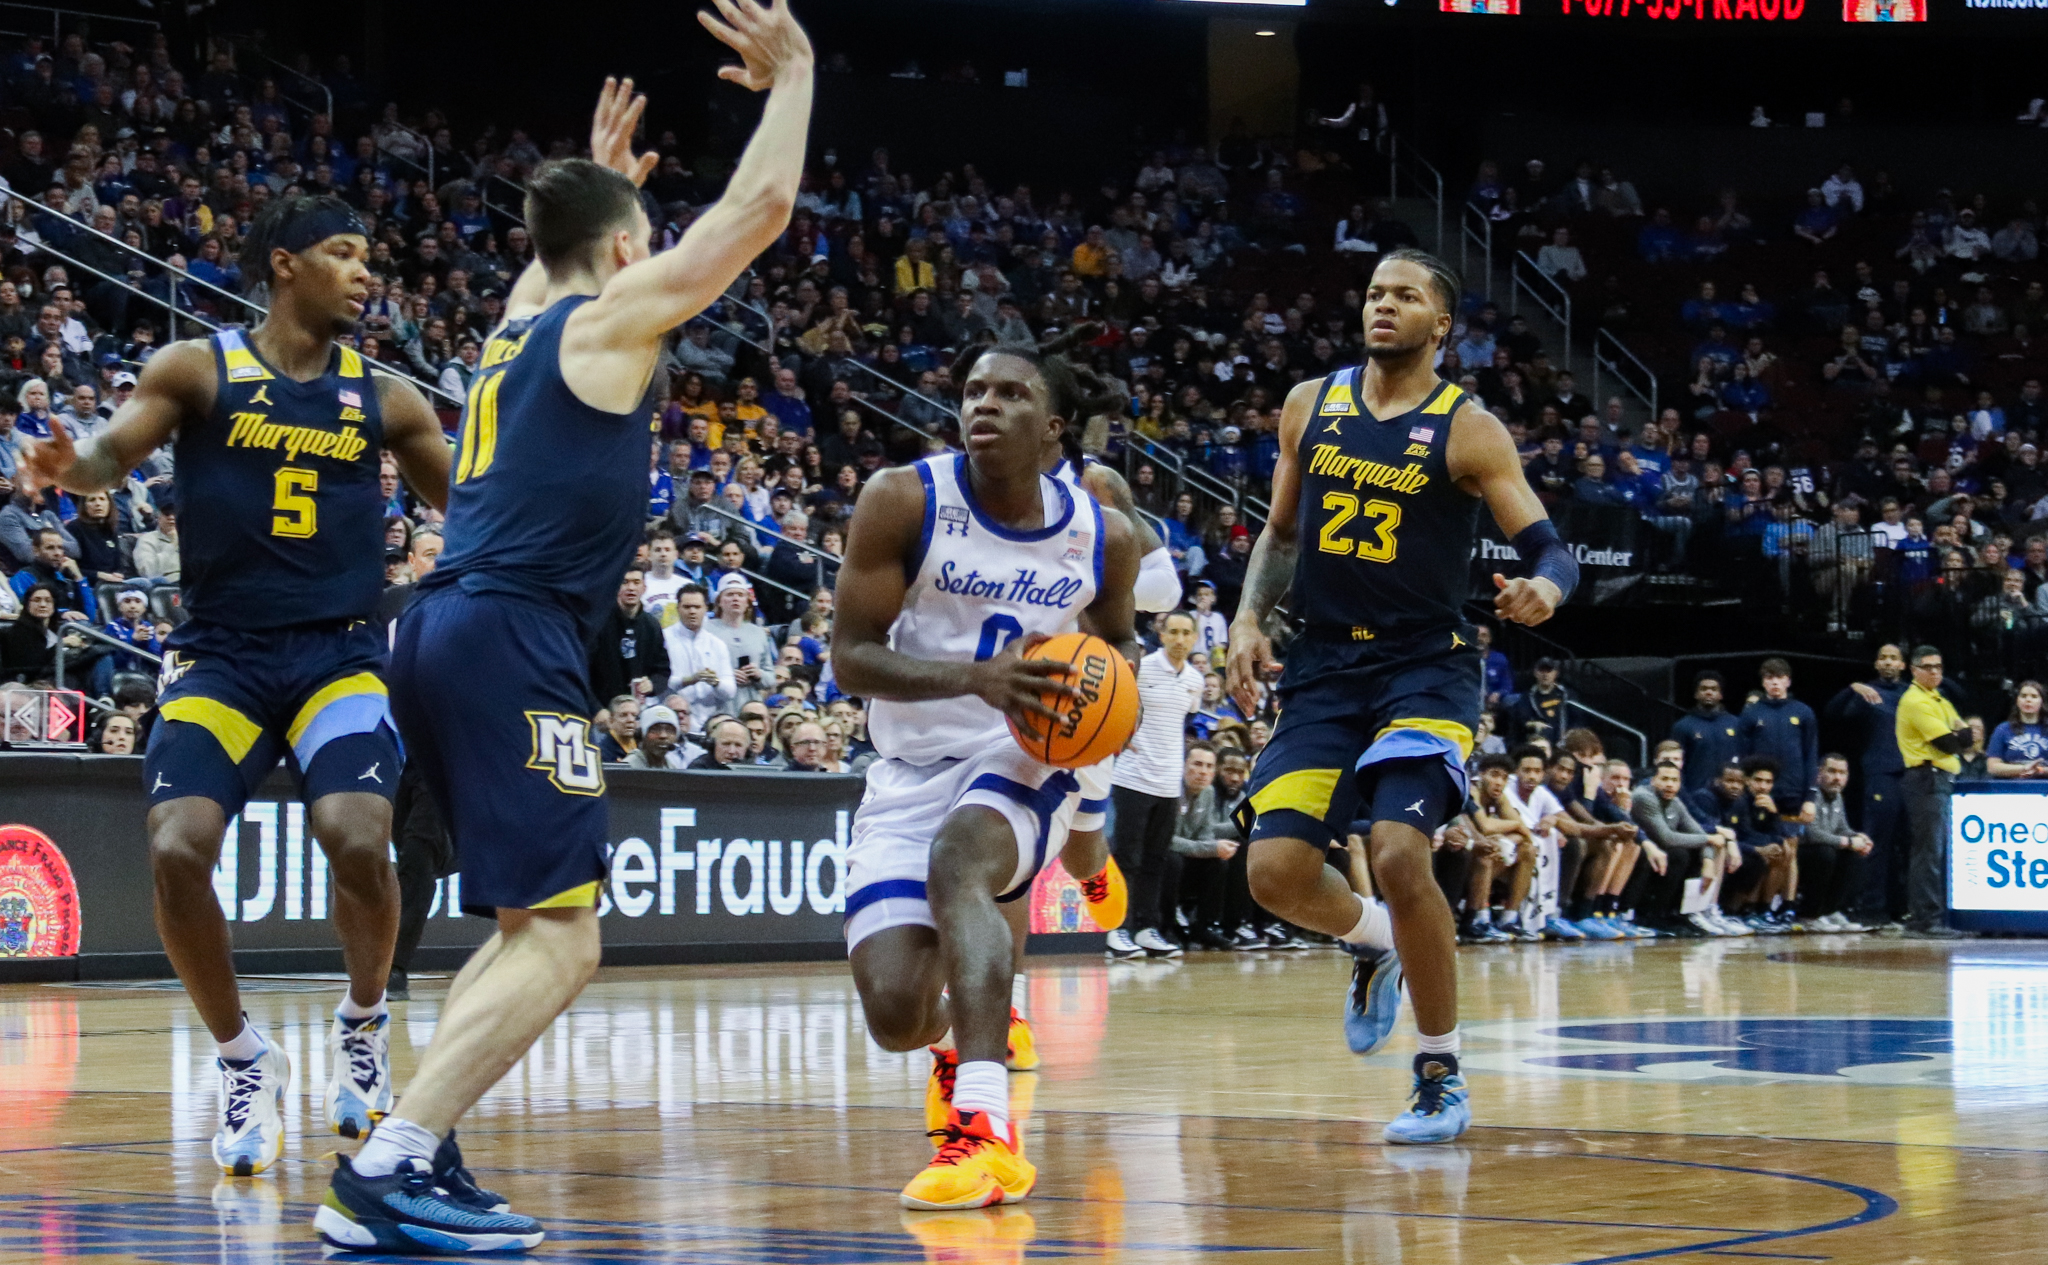 Kadary Richmond slices into the paint against Marquette.